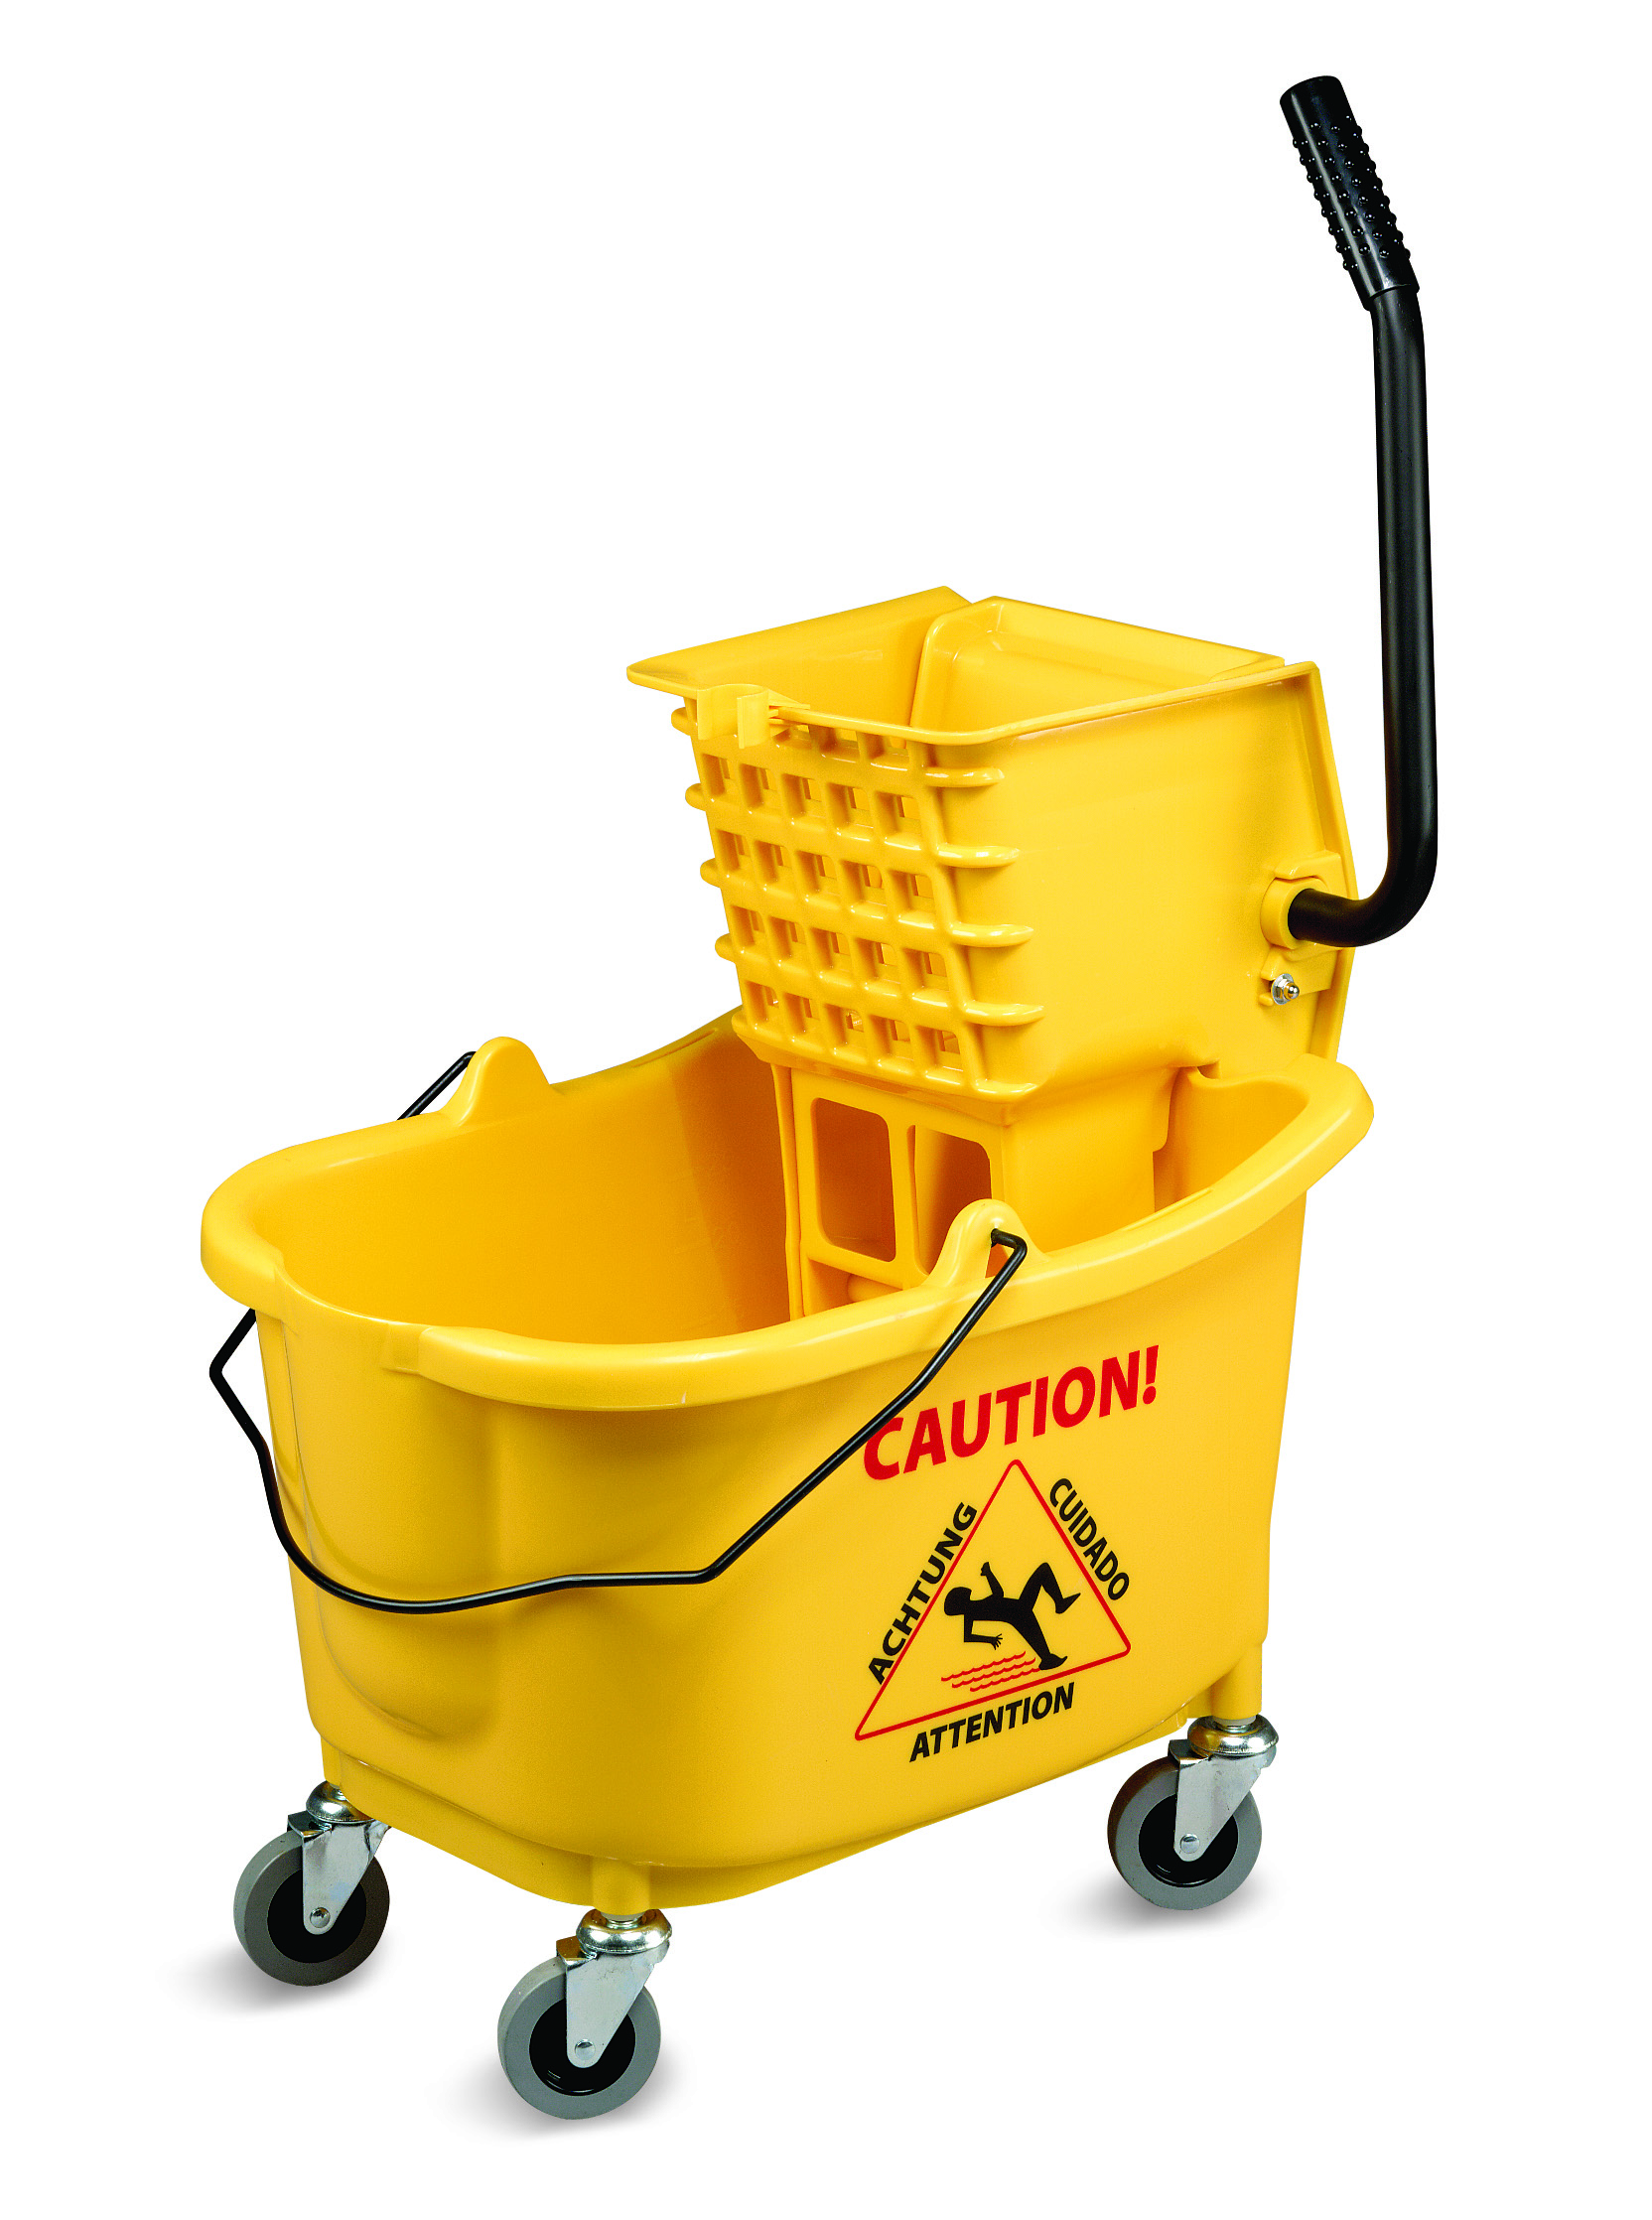 ***** USE J26353Y *****
1010 Yellow 35 Qt. Mop Bucket 
and Wringer